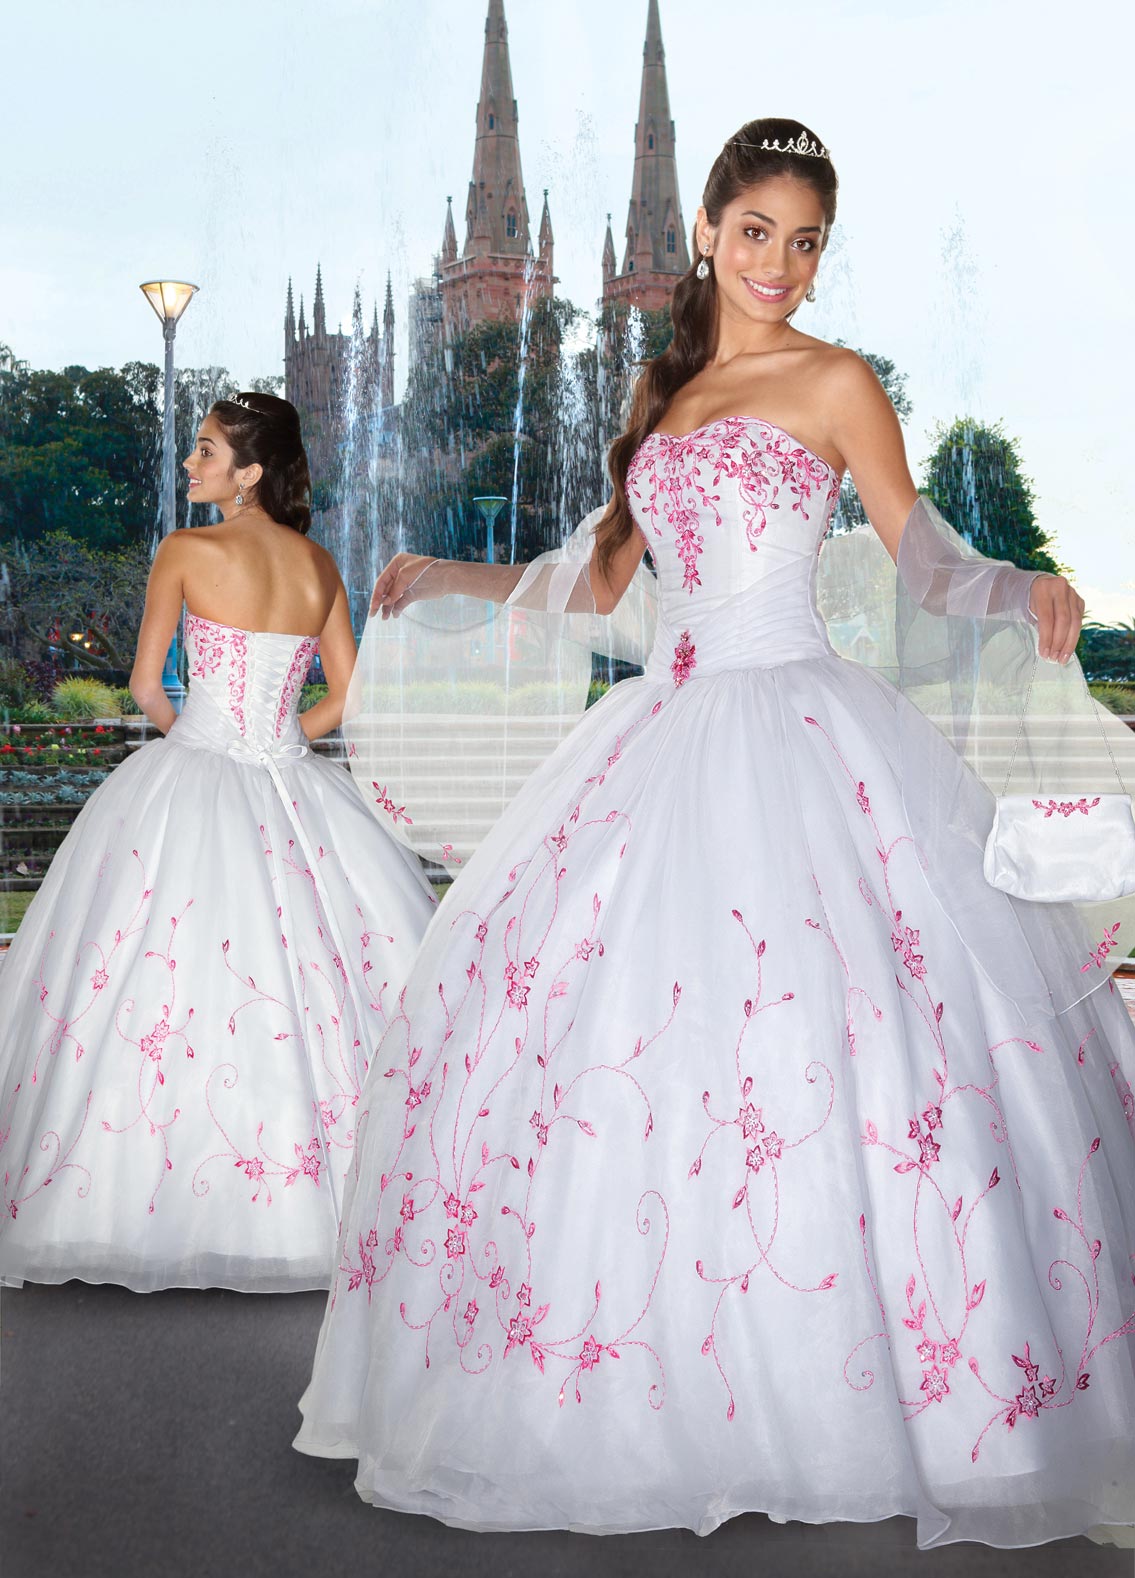 White Ball Gown Strapless Sweetheart Lace Up Full Length Quinceanera Dresses With Pink Embroidery 